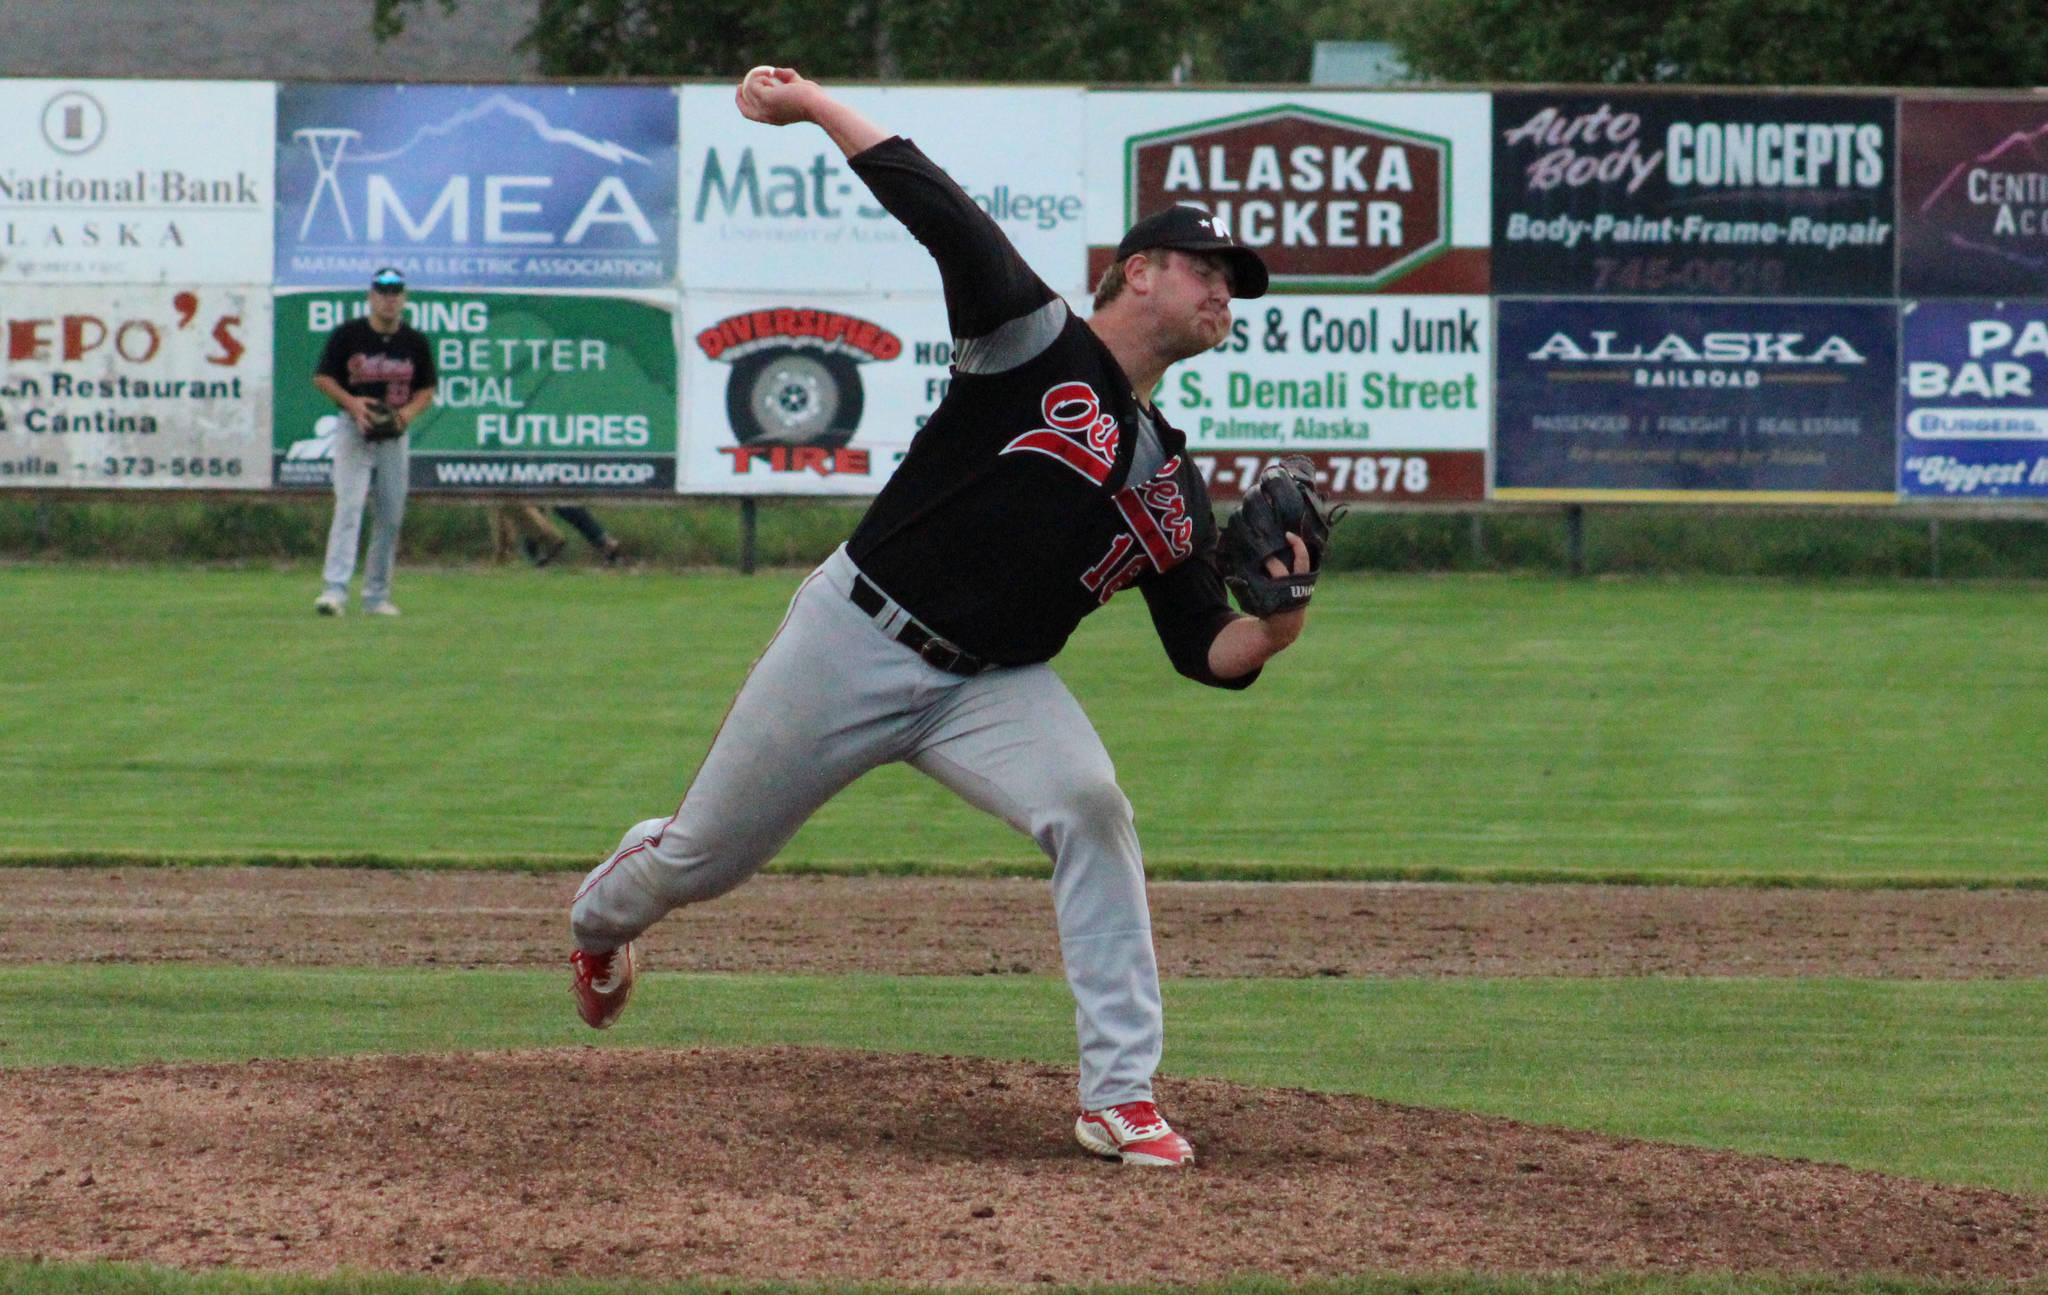 Peninsula Oilers pitcher Jacob Dillon delivers to the Mat-Su Miners on Thursday, July 8, 2021, at Hermon Brothers Field in Palmer, Alaska. (Photo by Tim Rockey/Frontiersman)